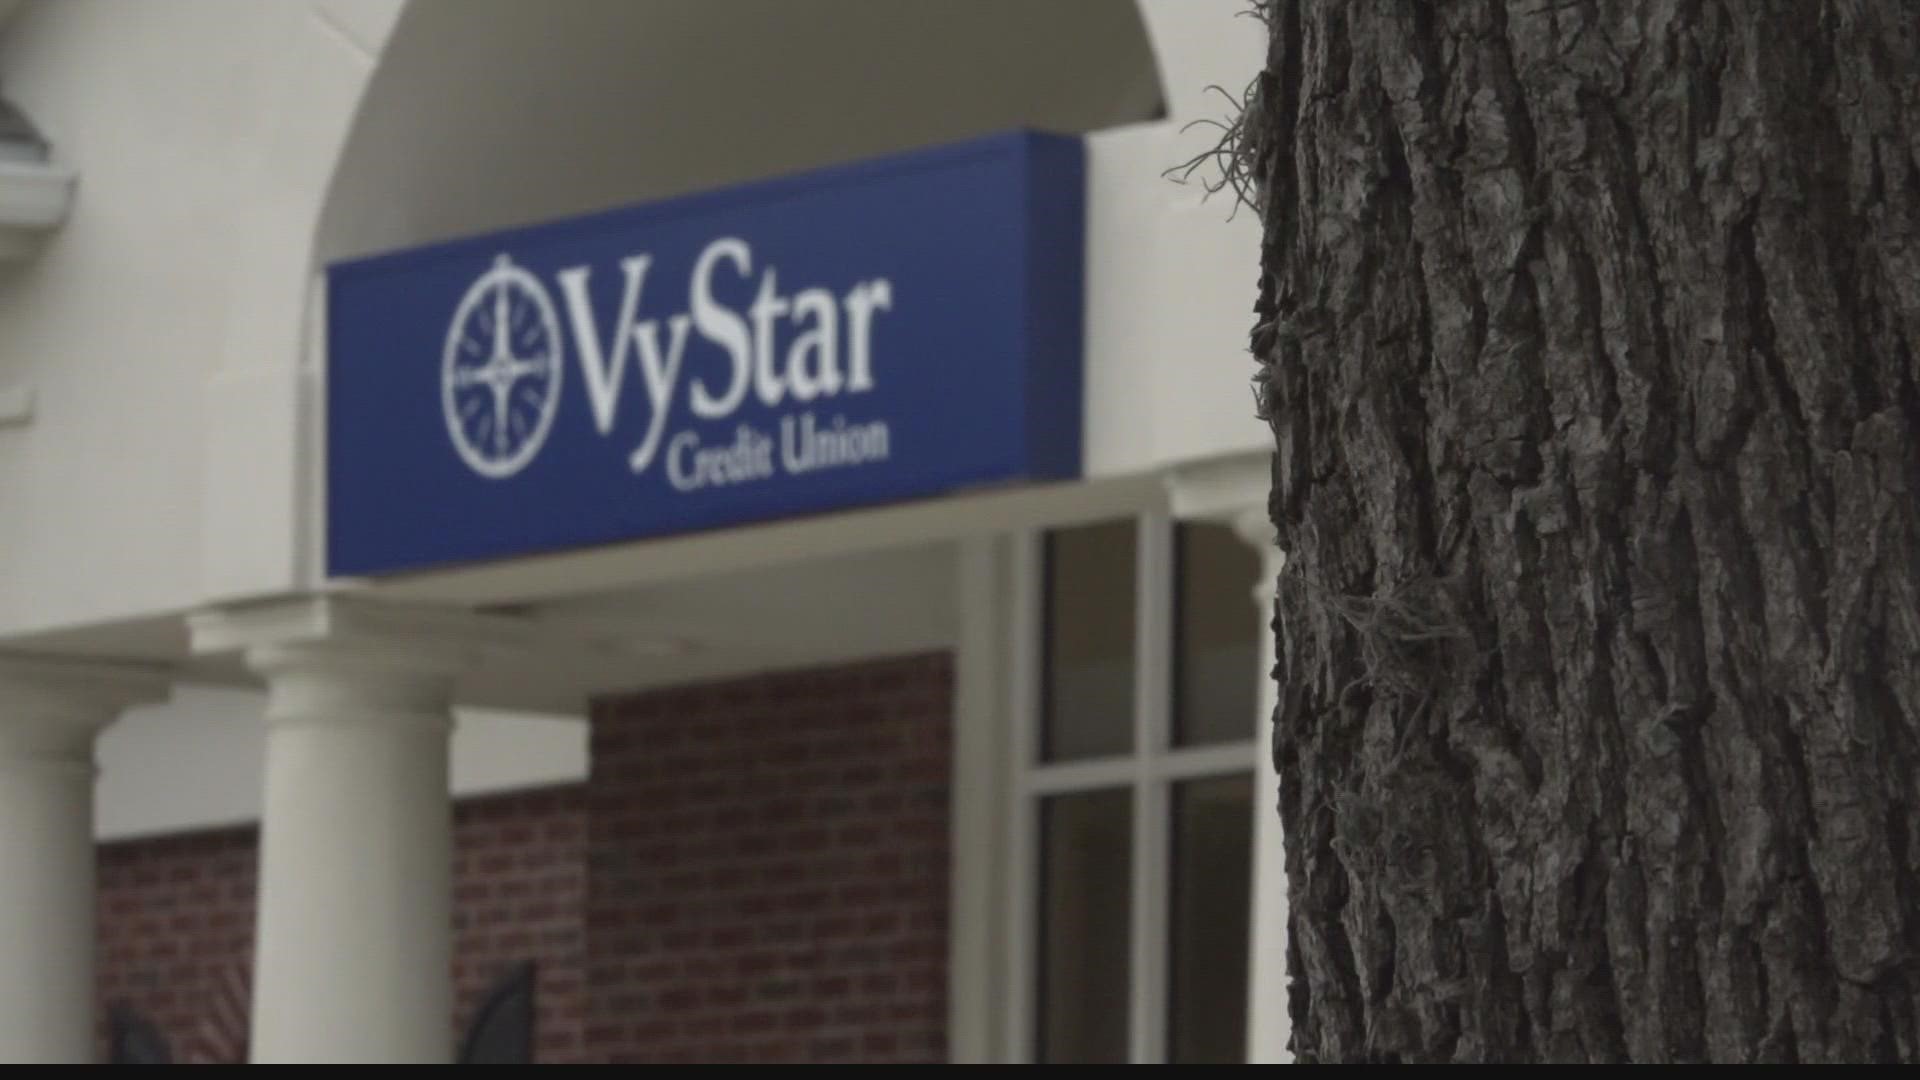 One man says his credit score dropped significantly as a result of the outages.